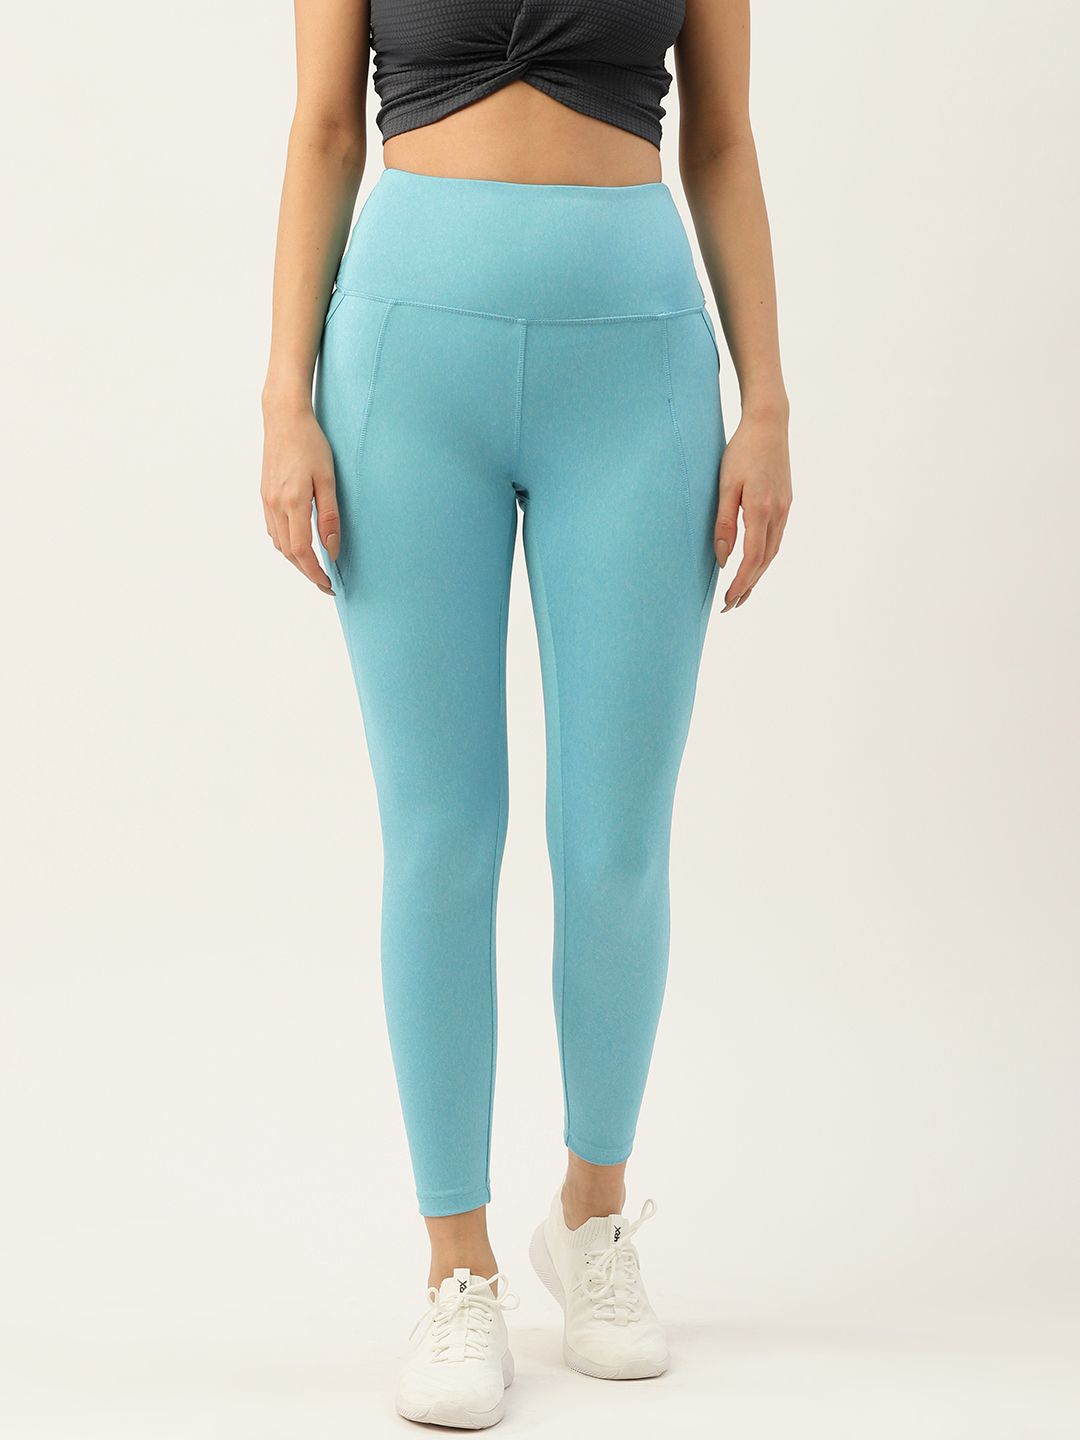 KICA Women Blue High Waisted Leggings with Pockets in Melange Fabric Mid Compression Price in India